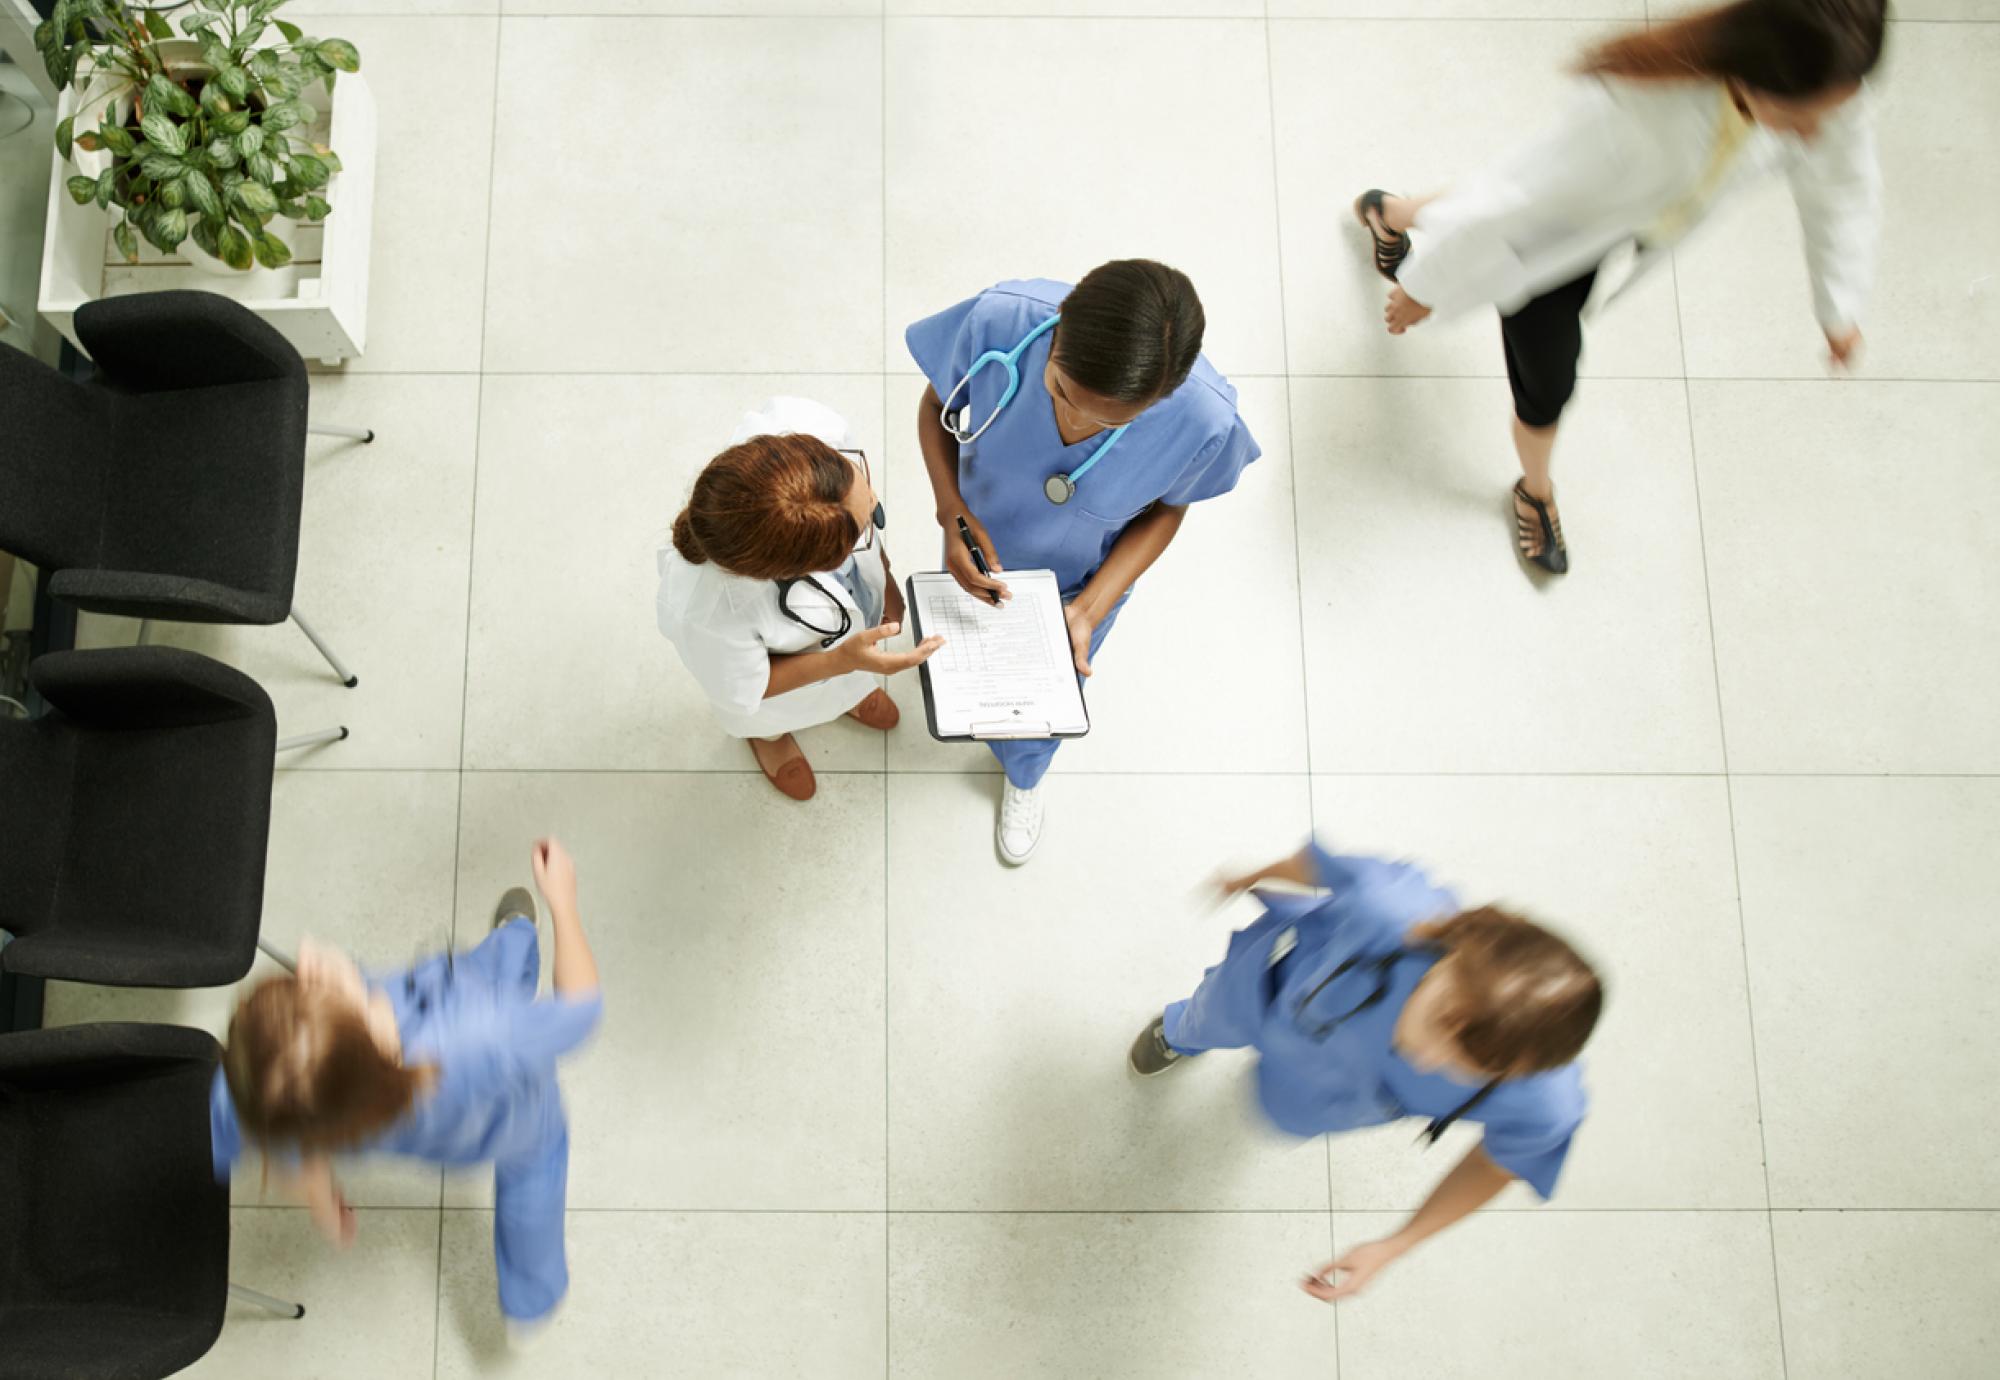 Overhead view of a busy hospital depicting the NHS Confederation's call for government funding